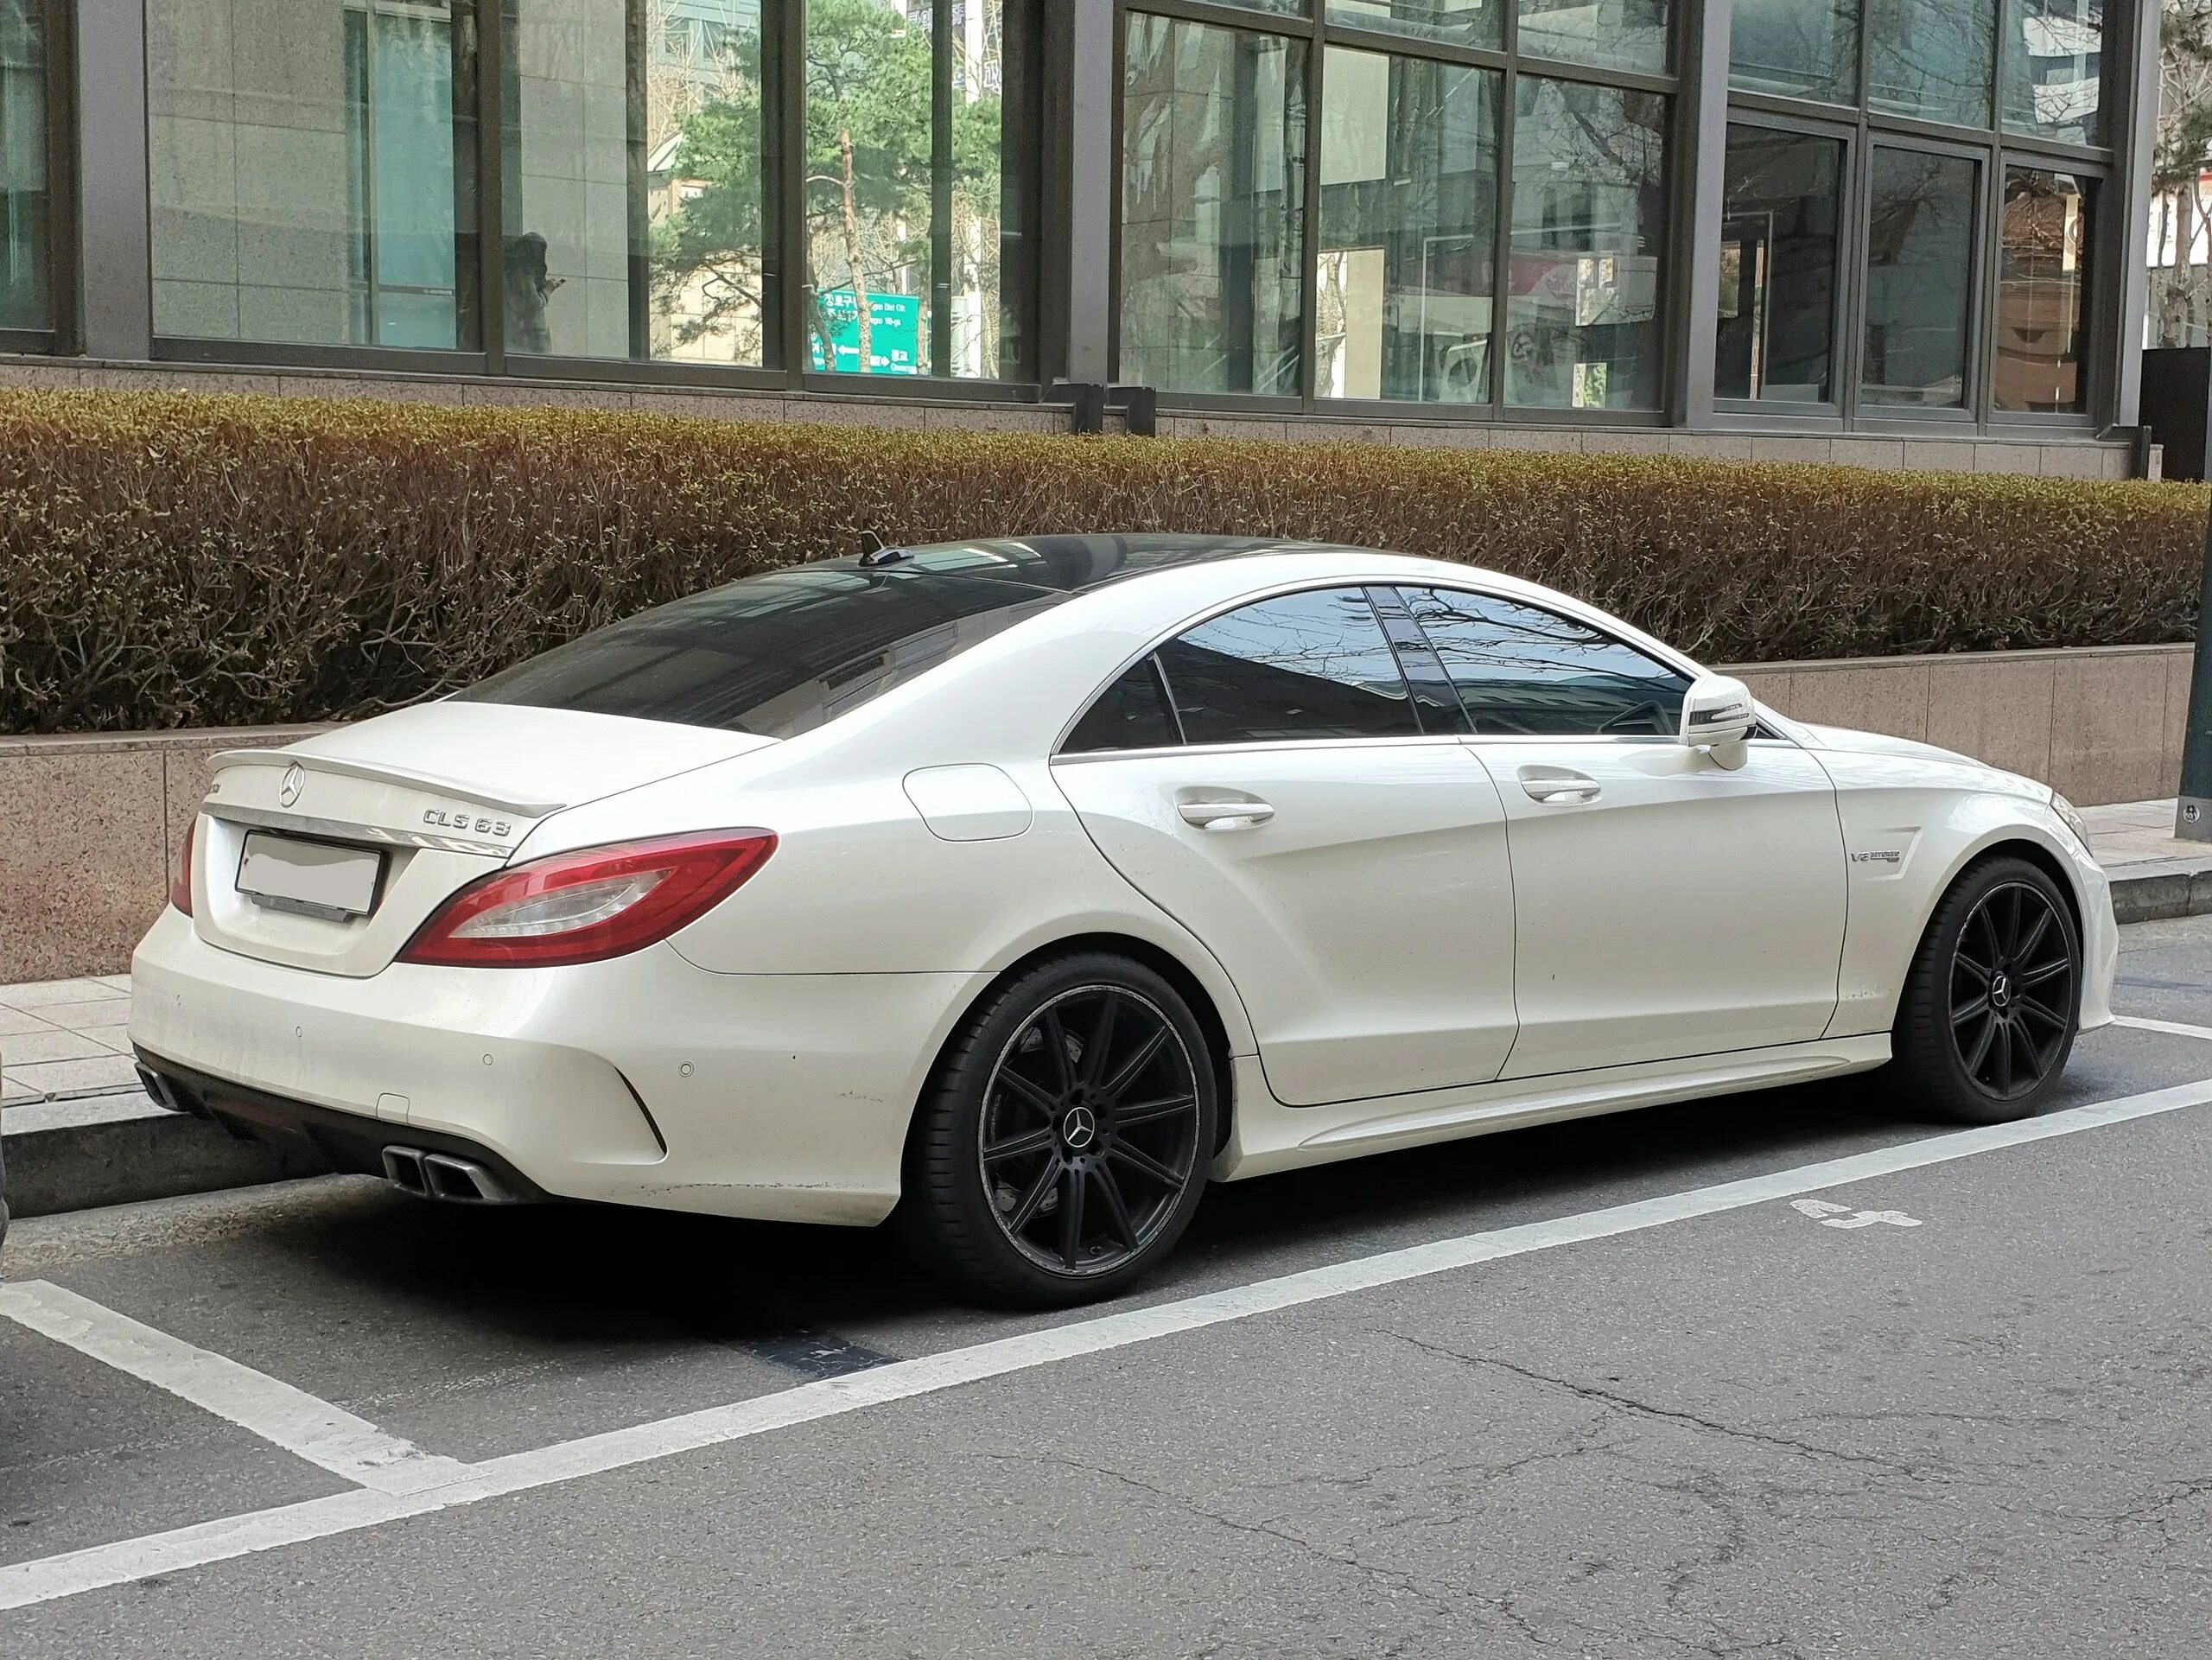 Mercedes 218. Мерседес CLS 63. Мерседес CLS 63 AMG белый. Mercedes GLS 63 AMG White. Mercedes CLS 63 218.